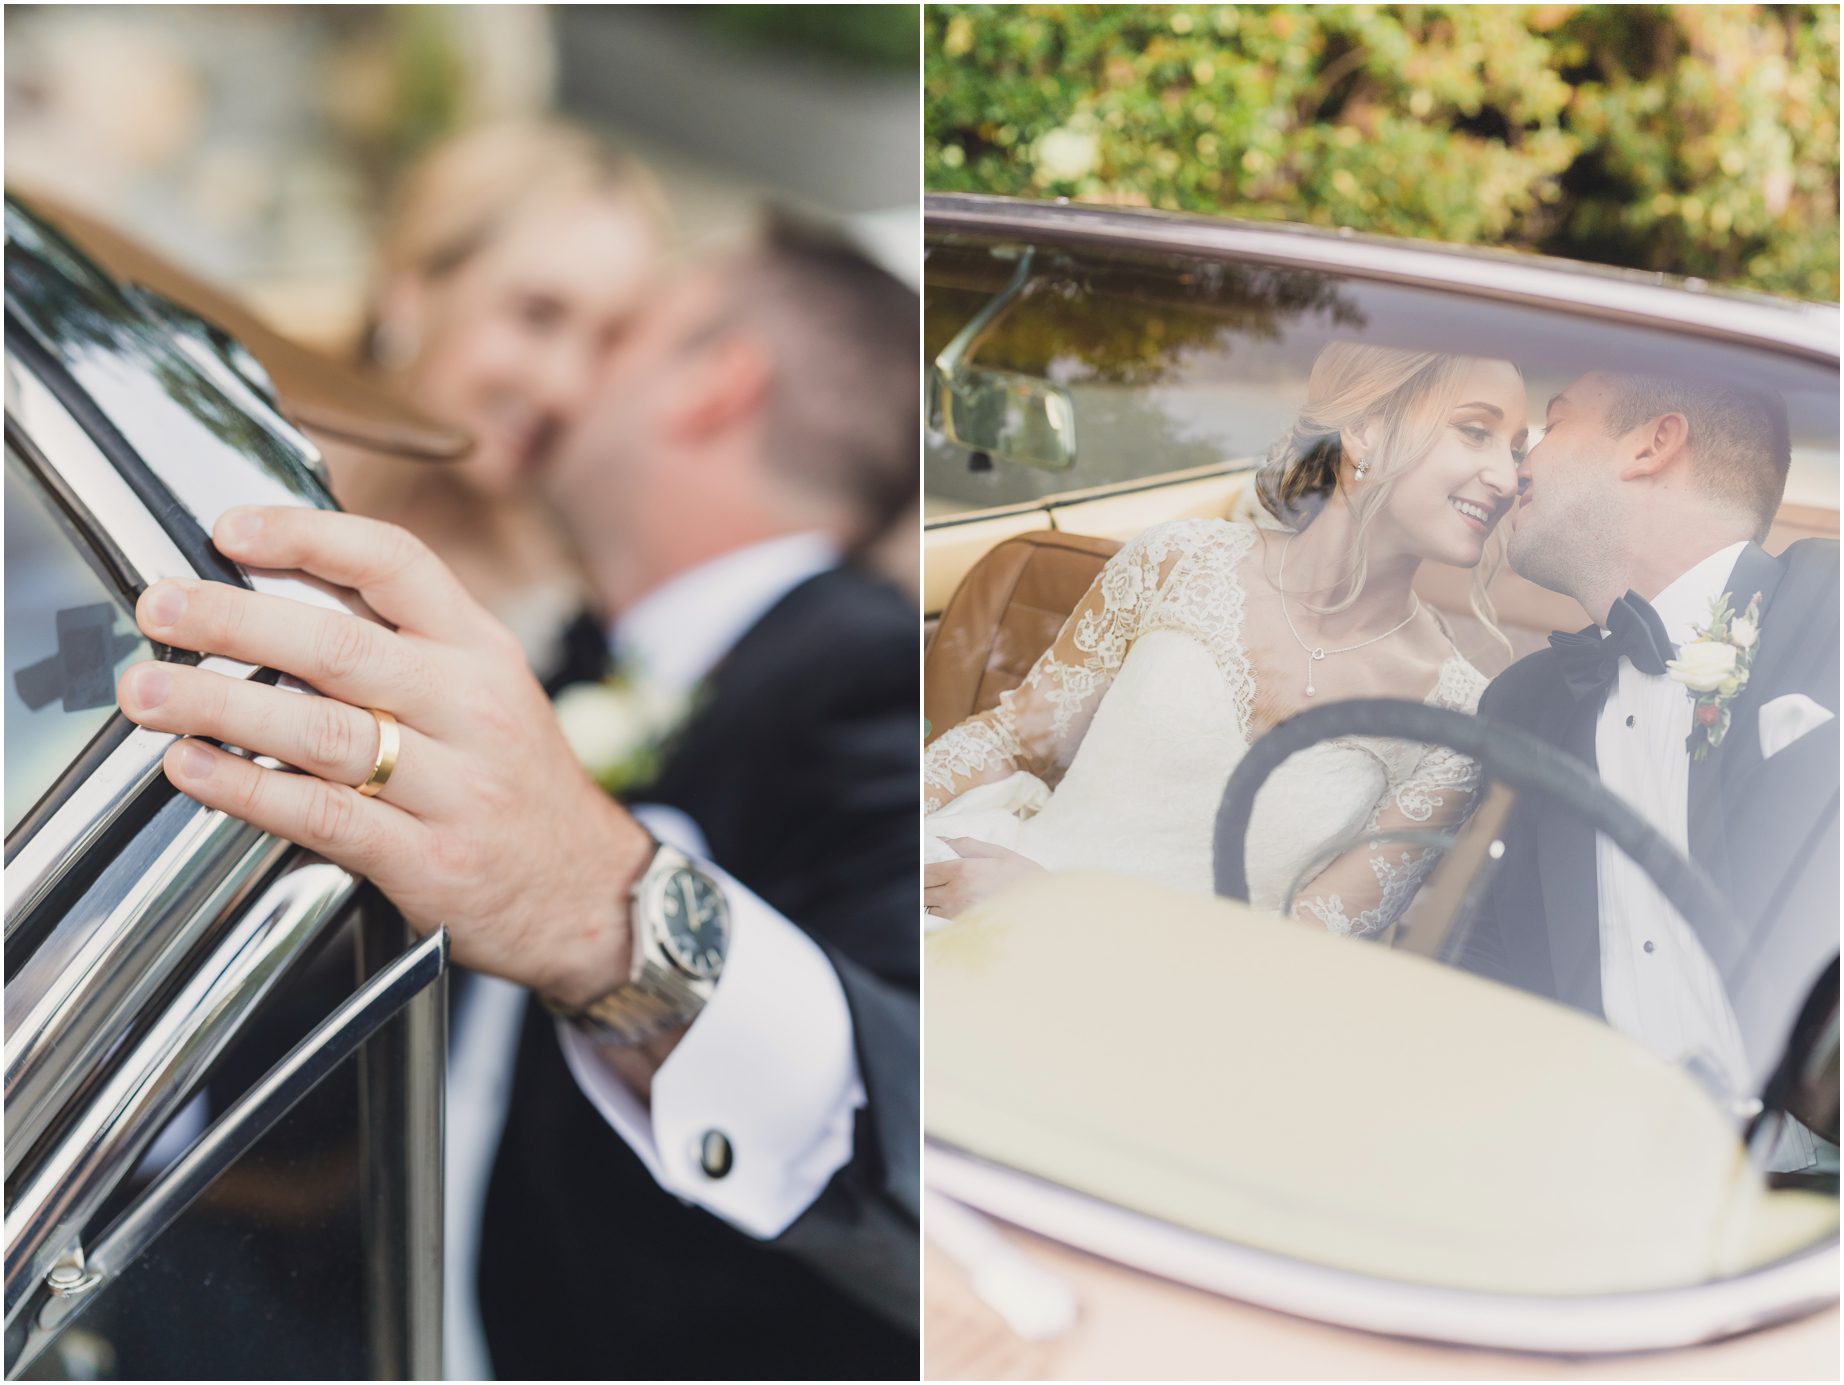 A photograph of a bride and groom in a classic car features the groom's gold wedding ring and his watch, while in another photograph the bride and groom share an intimate moment in the front seat of a classic car, faces close together, smiling.